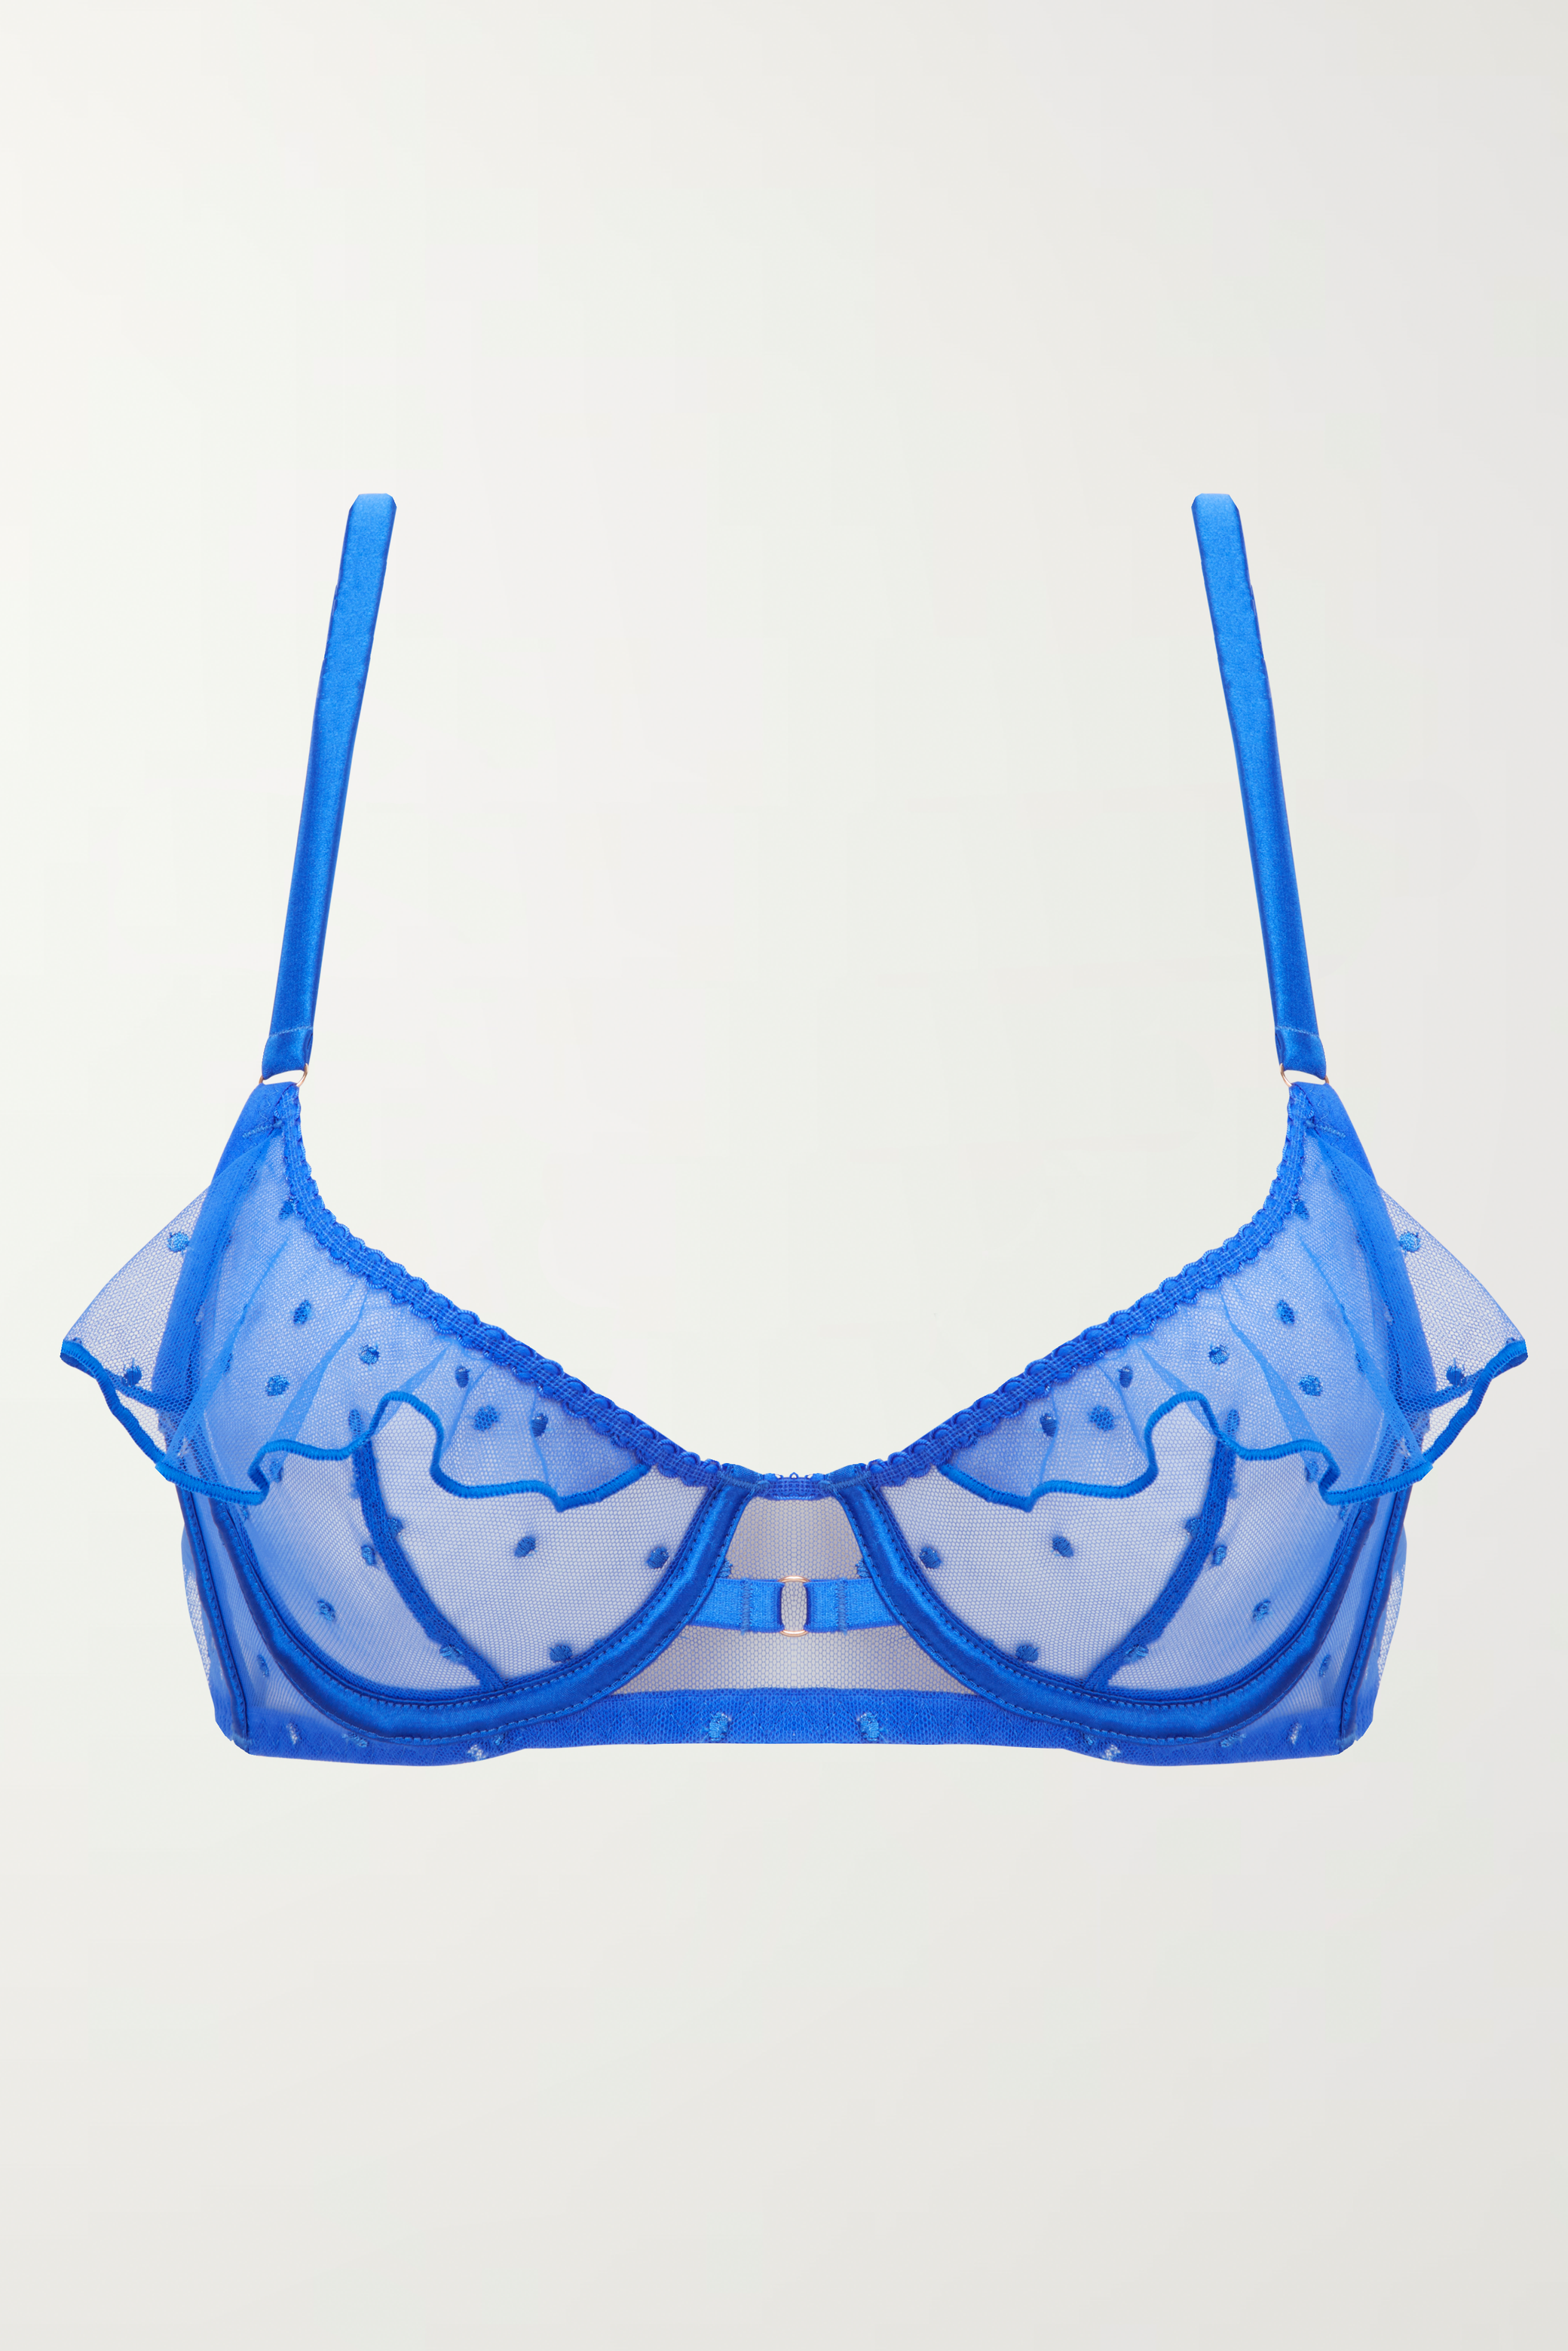 Don't Call Me Baby' Blue Lace Bra - Untold Story